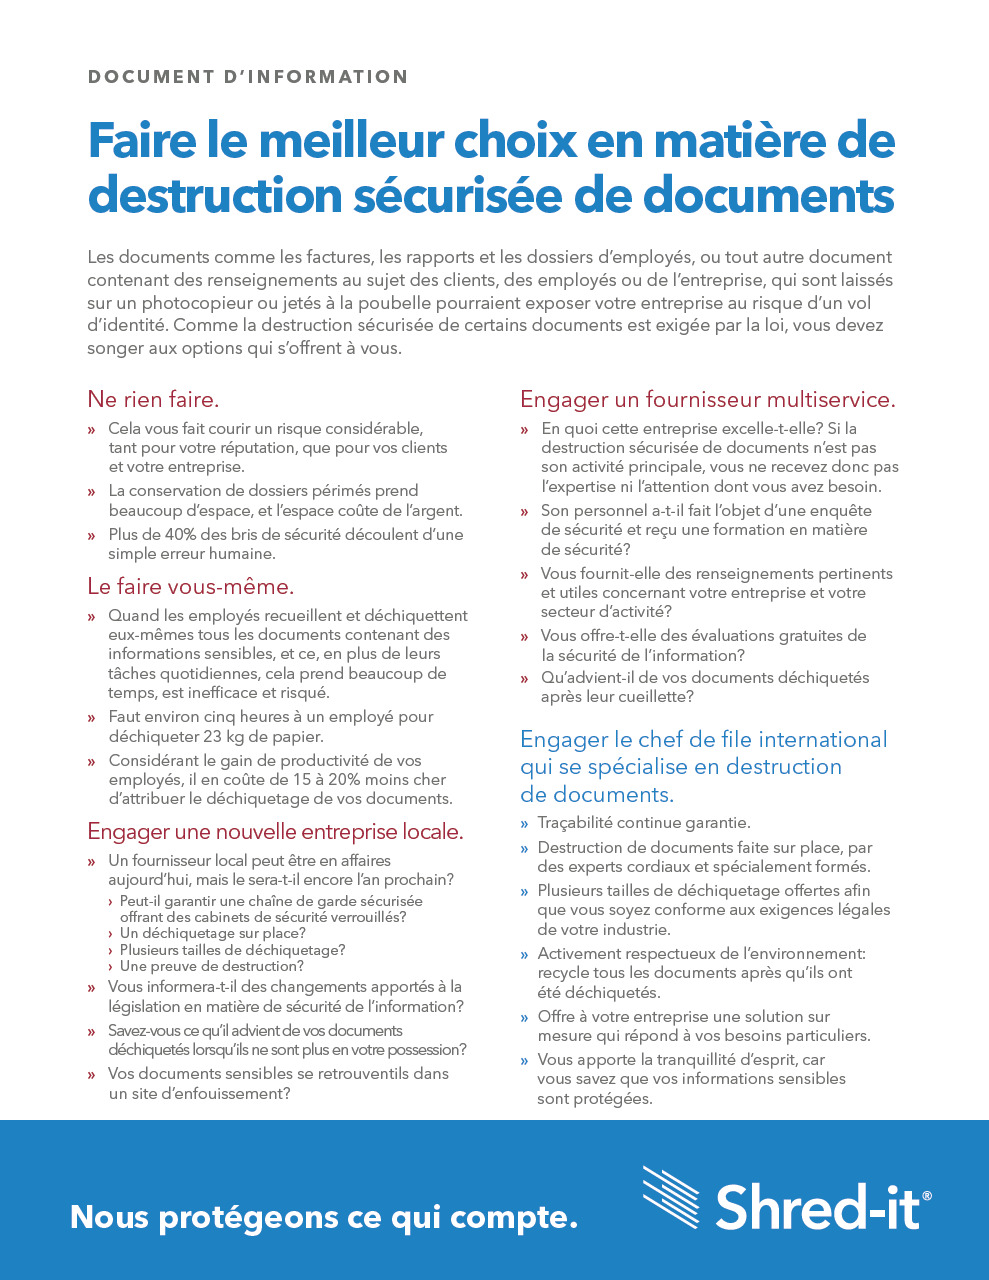 Shred-it-Making-Best-Choice-For-Secure-Document-Destruction-French.pdf